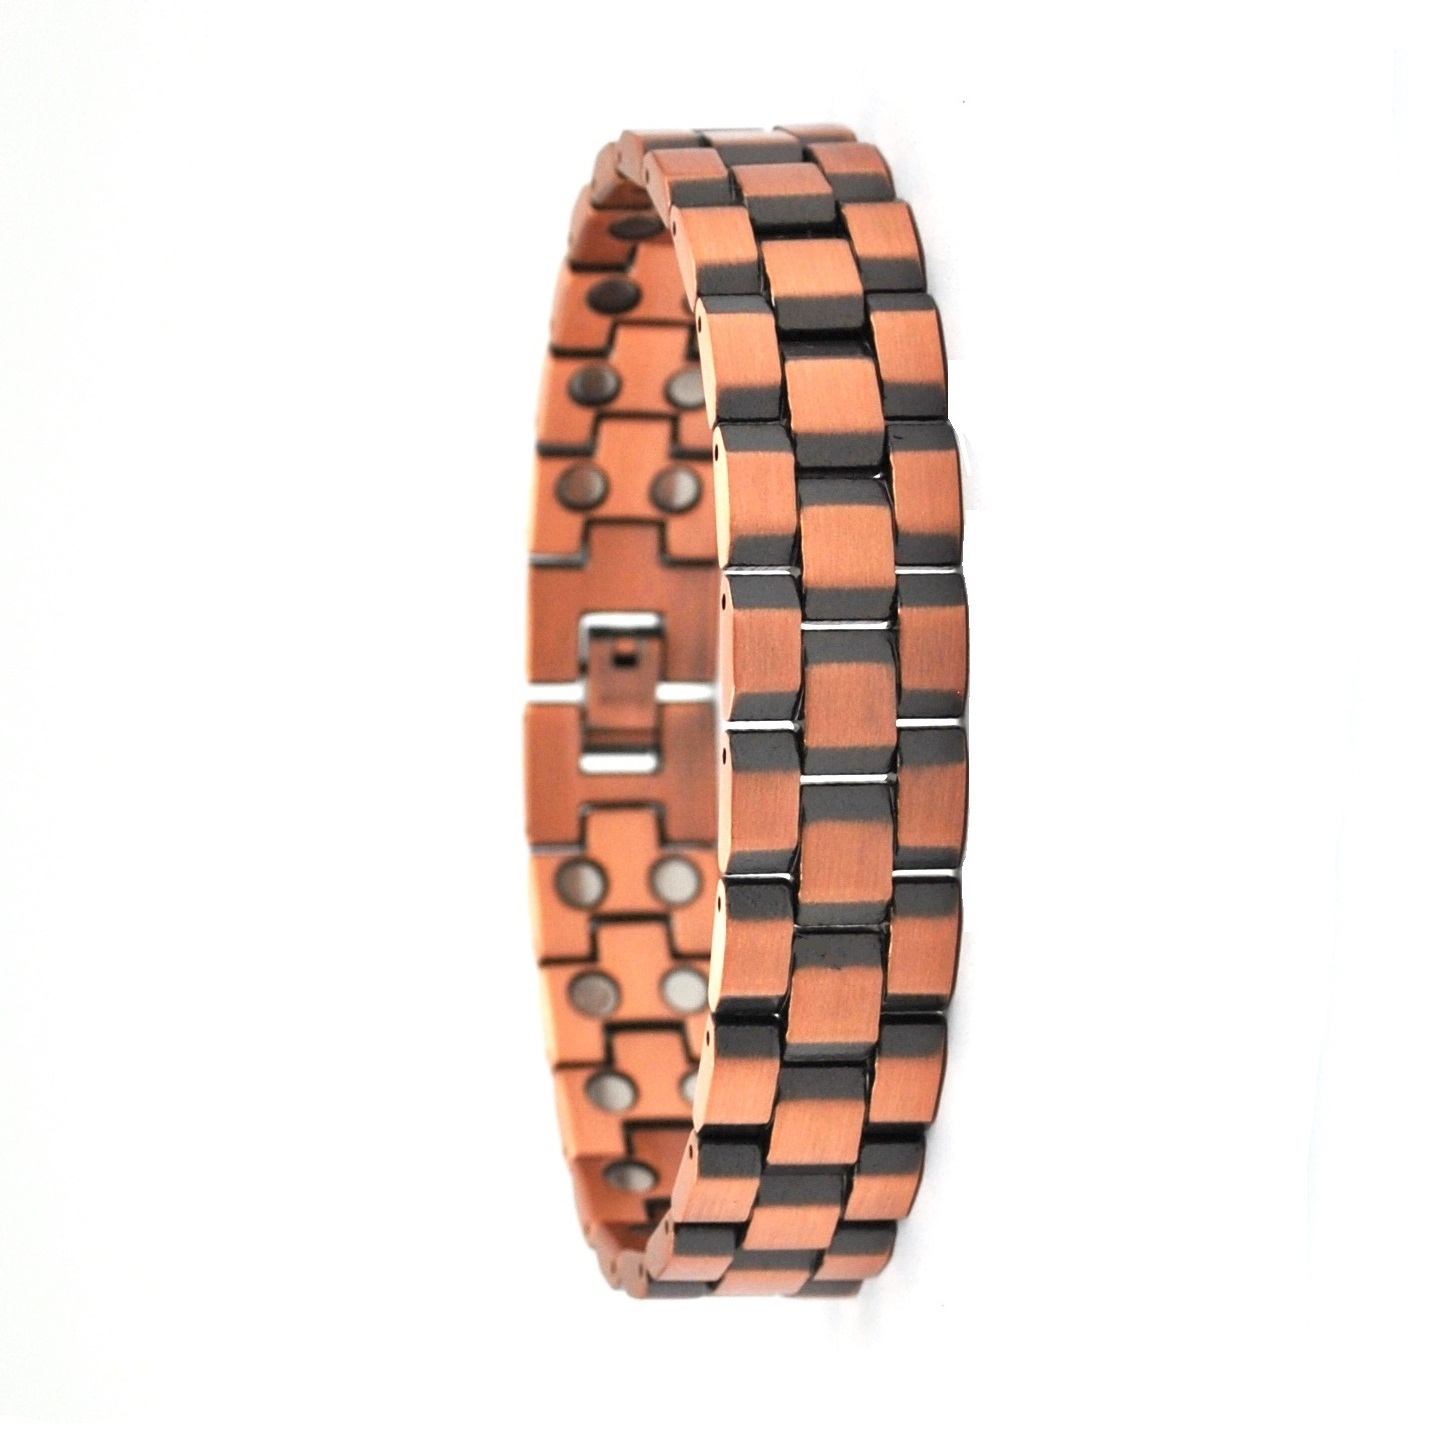 99.9% Pure Copper Brick Links Magnetic Therapy Bracelet For Men #RCB-001